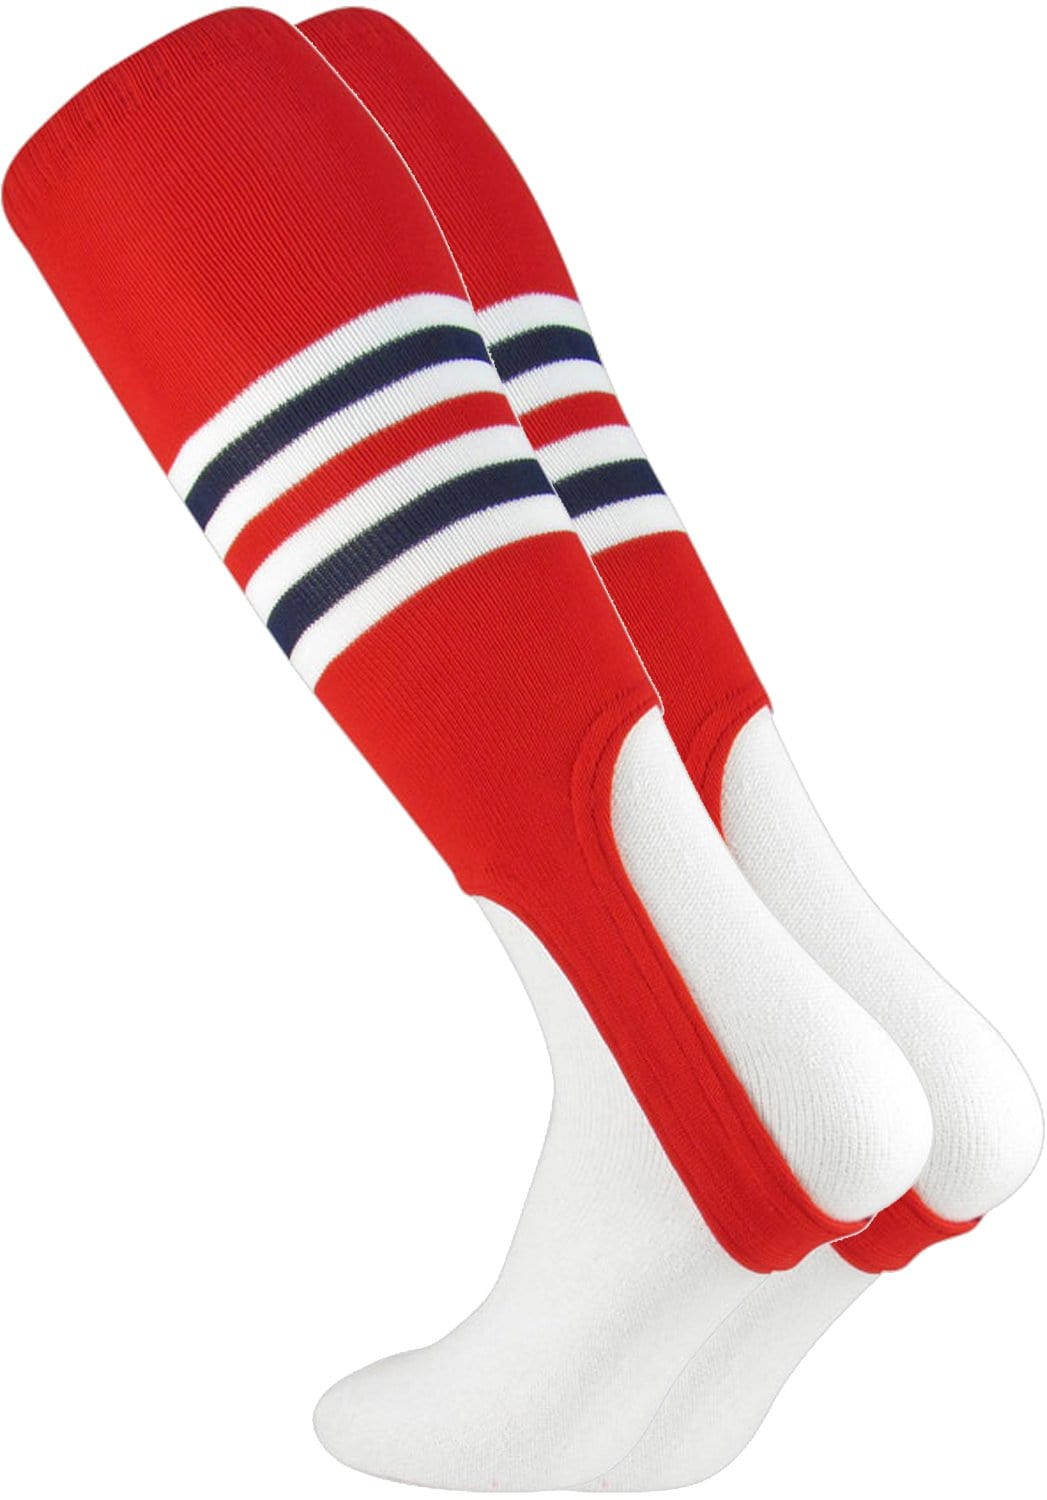 Football Spats and Cleat Covers — TCK